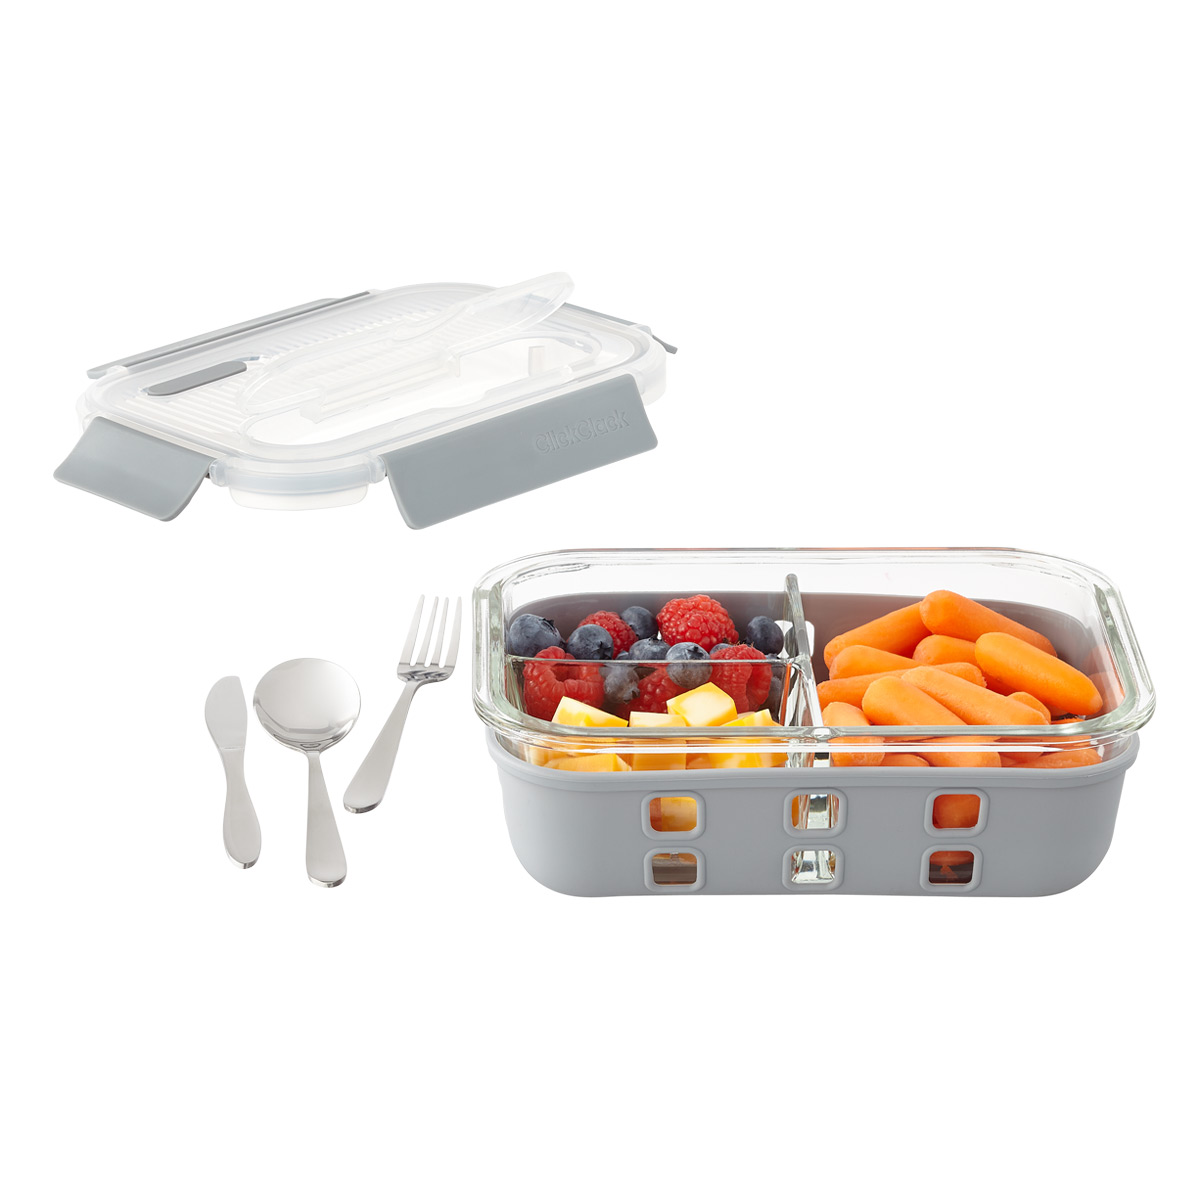 https://www.containerstore.com/catalogimages/425716/10084607_30_Ounce_Glass_Bento_Box_wi.jpg